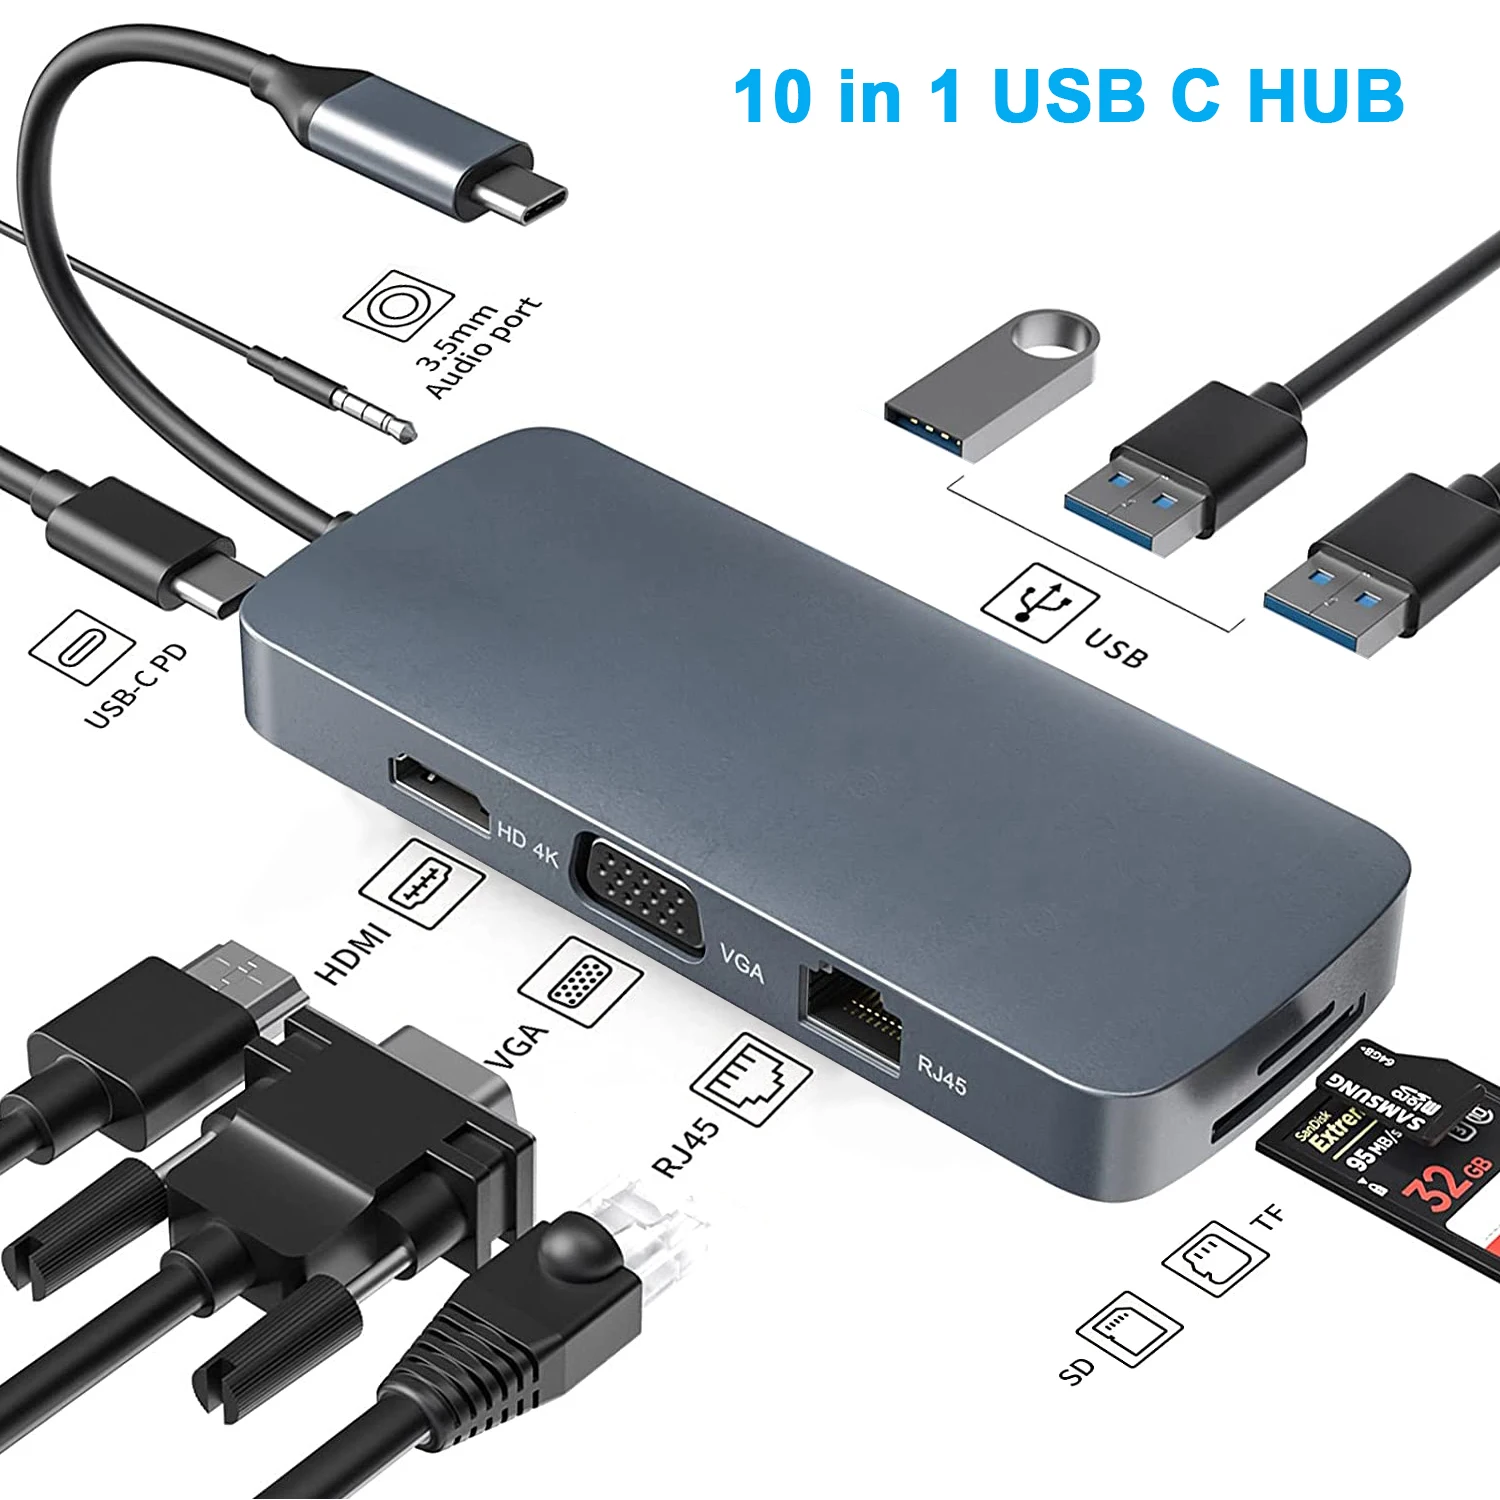 10 In 1 USB C Hub Adapter USB C Docking Station with...